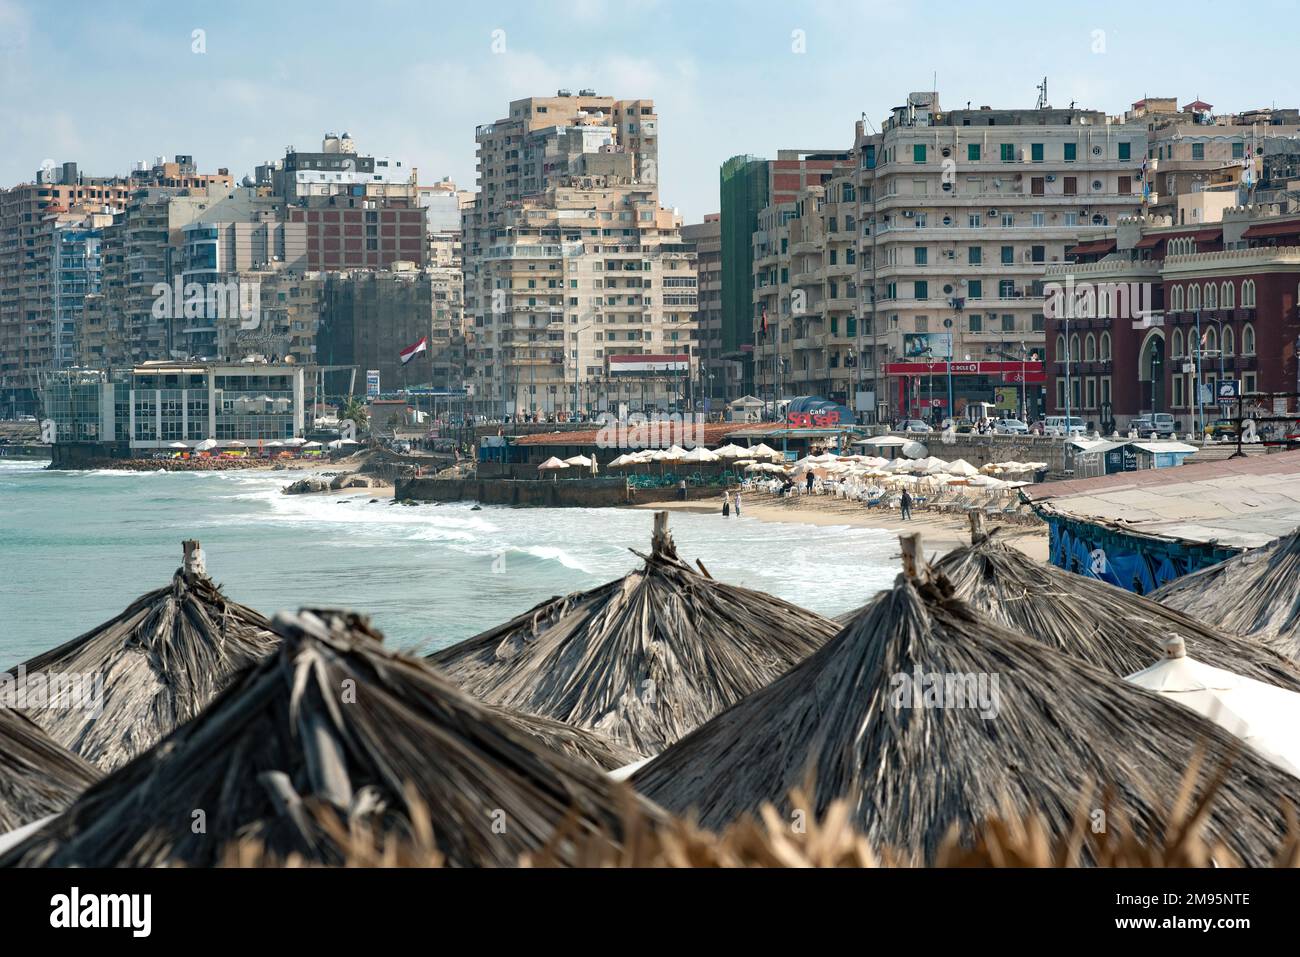 Alexandria, Egypt. December 2nd 2022 Apartment buildings and informal beach side stalls and structures along the Corniche, Alexandria, Egypt. Stock Photo